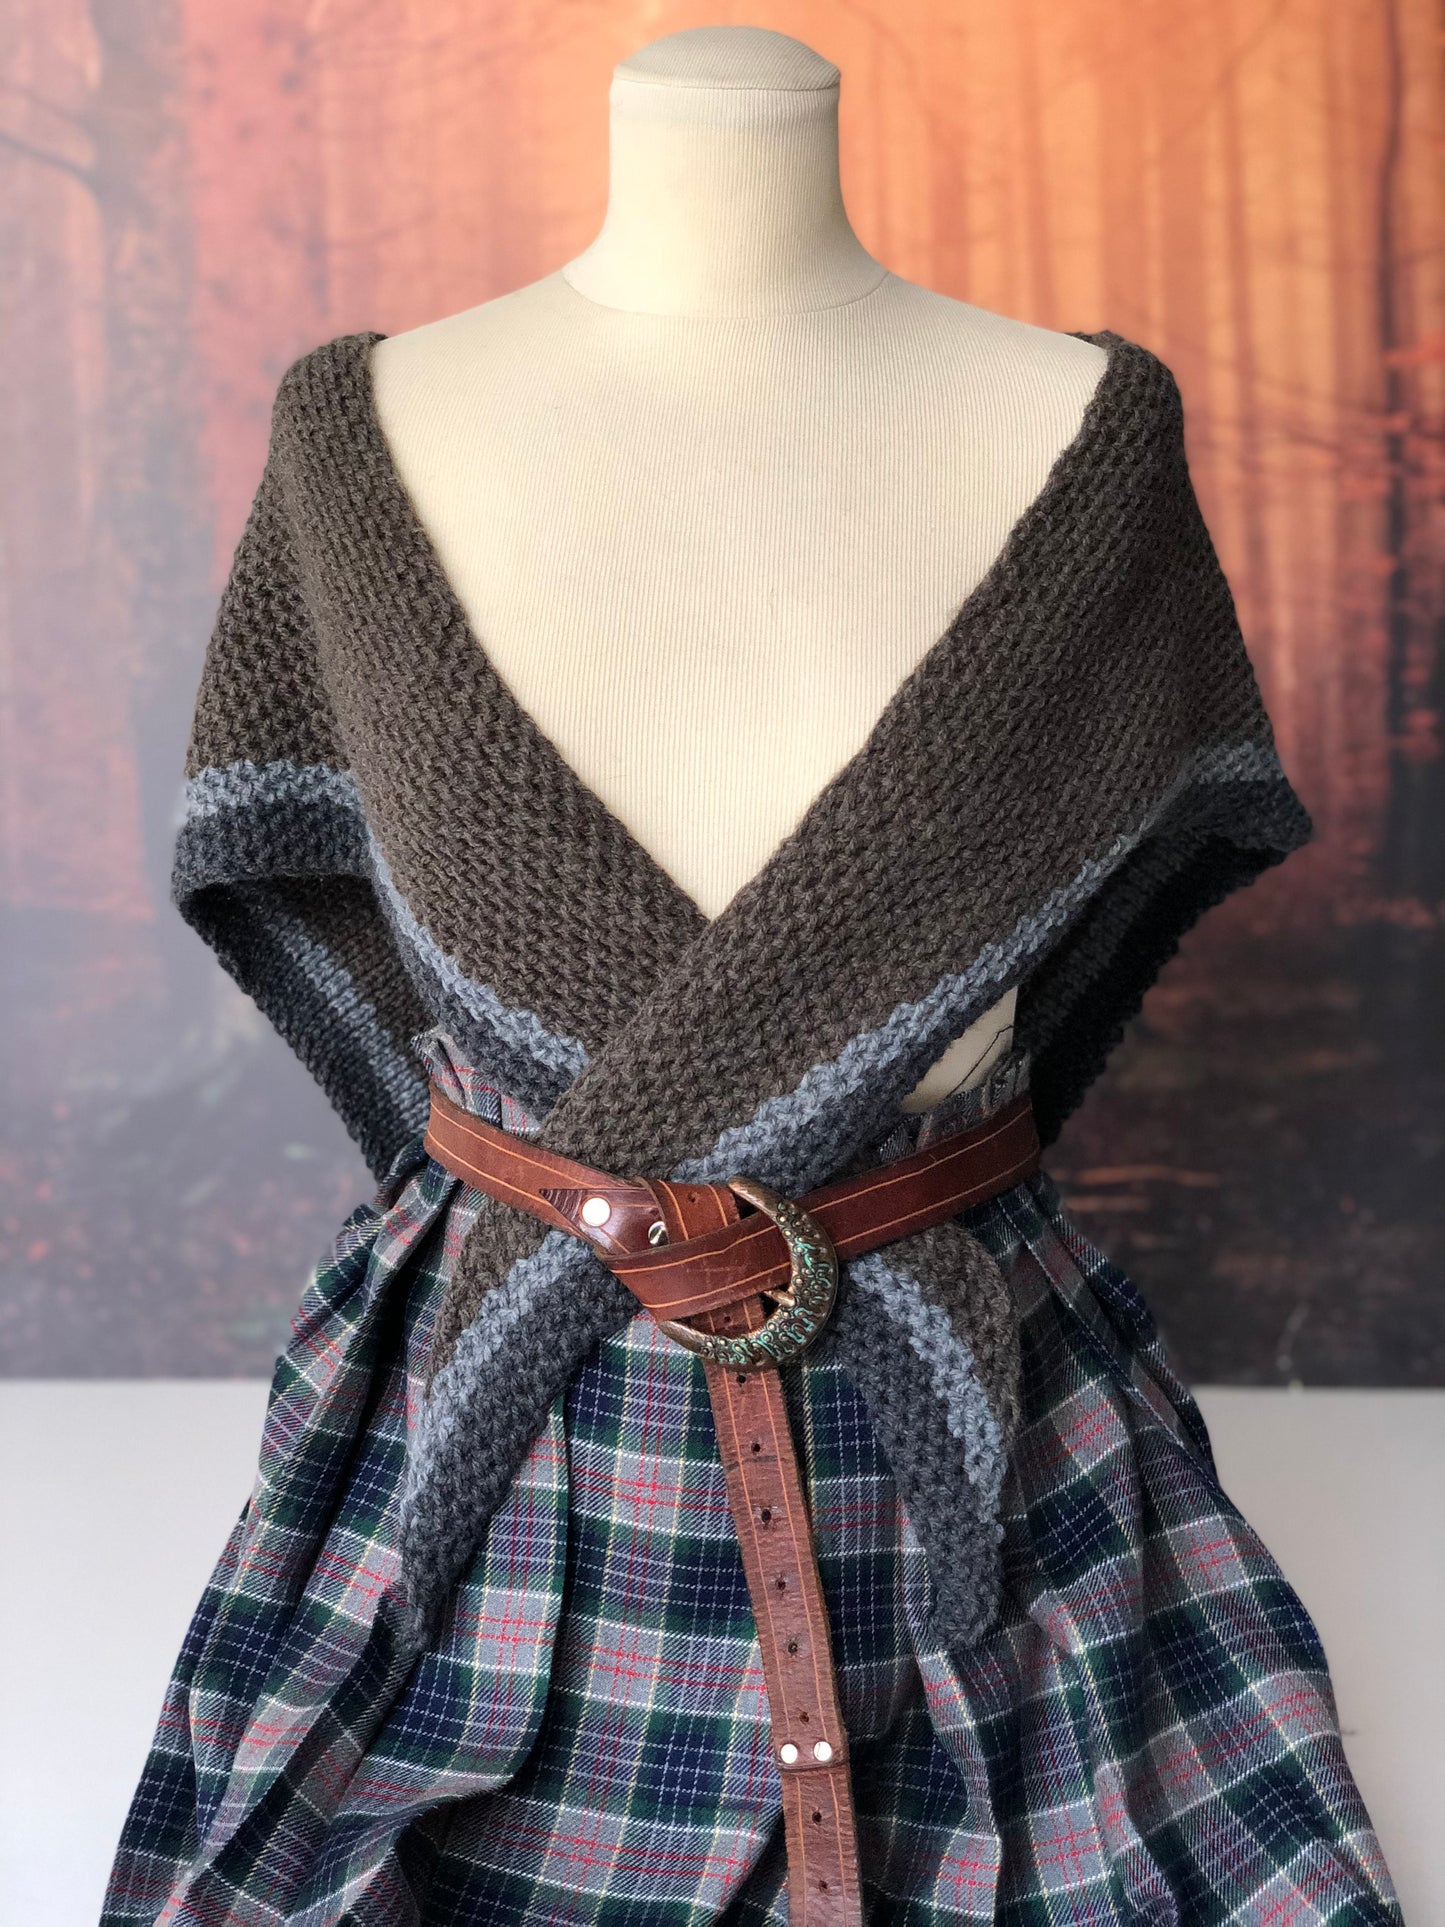 Outlander shawl handmade tricolor inspired in Claire's - Cottagecore medieval cape